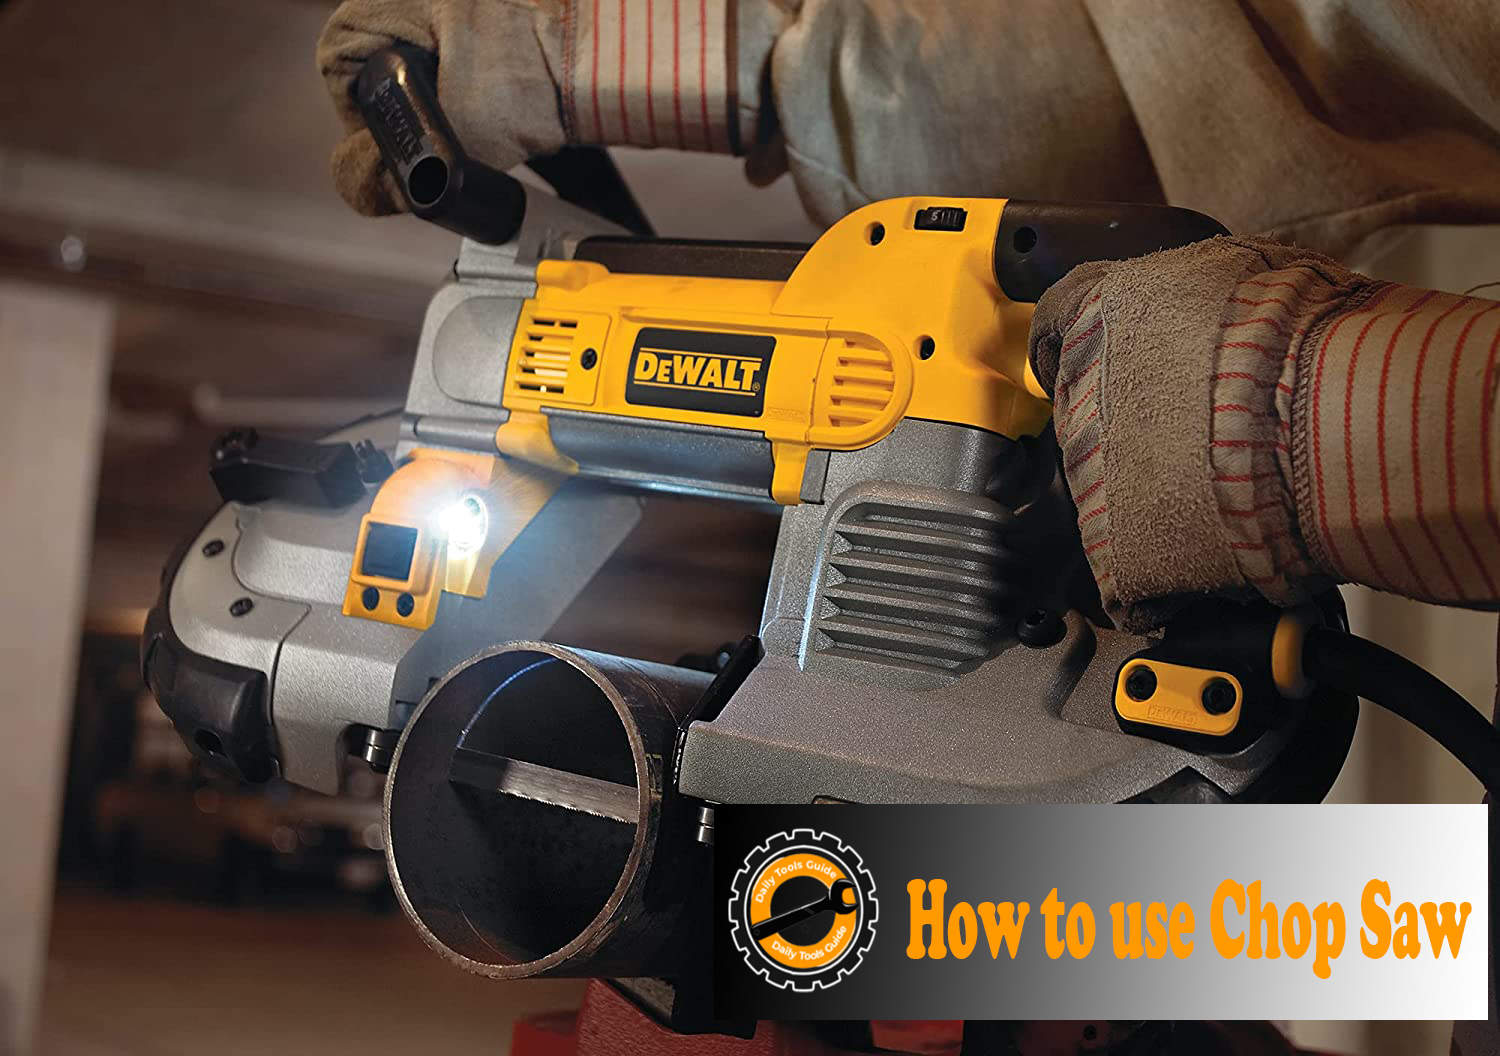 How to use Chop Saw